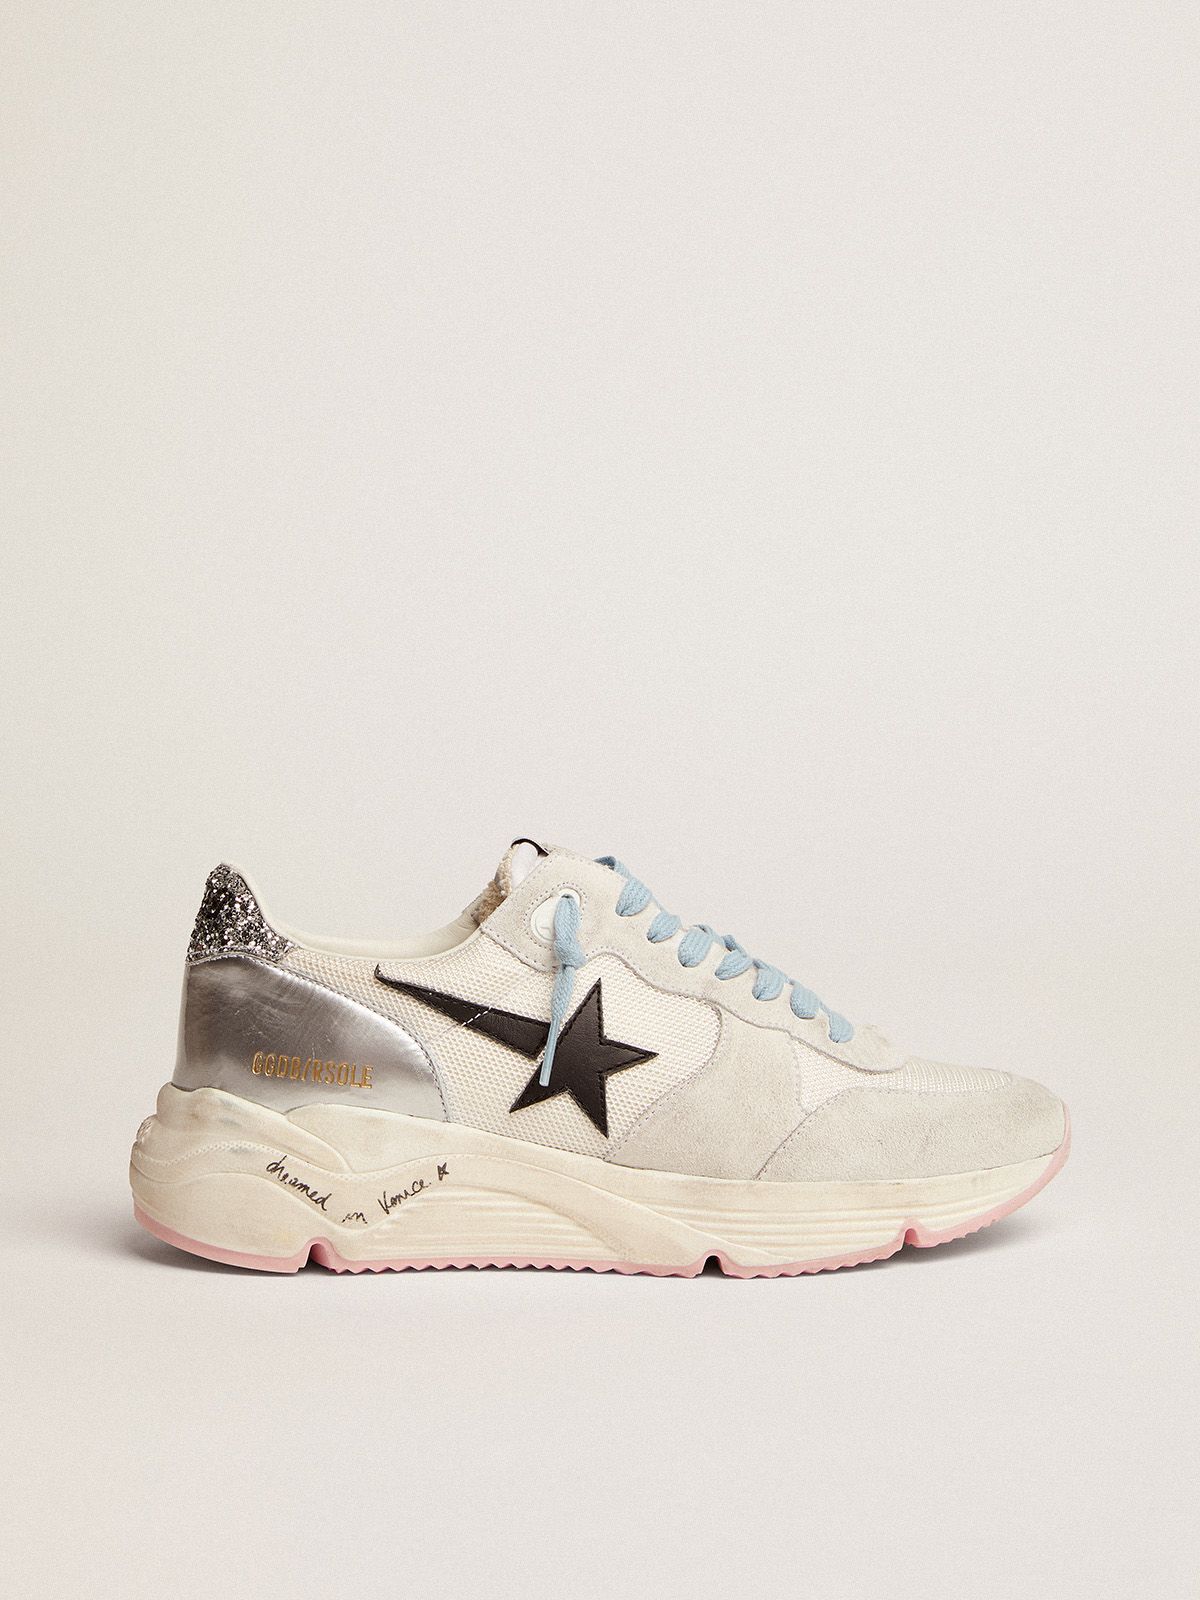 golden goose mesh leather sneakers white heel black LTD with star suede Running and glitter Sole silver in tab